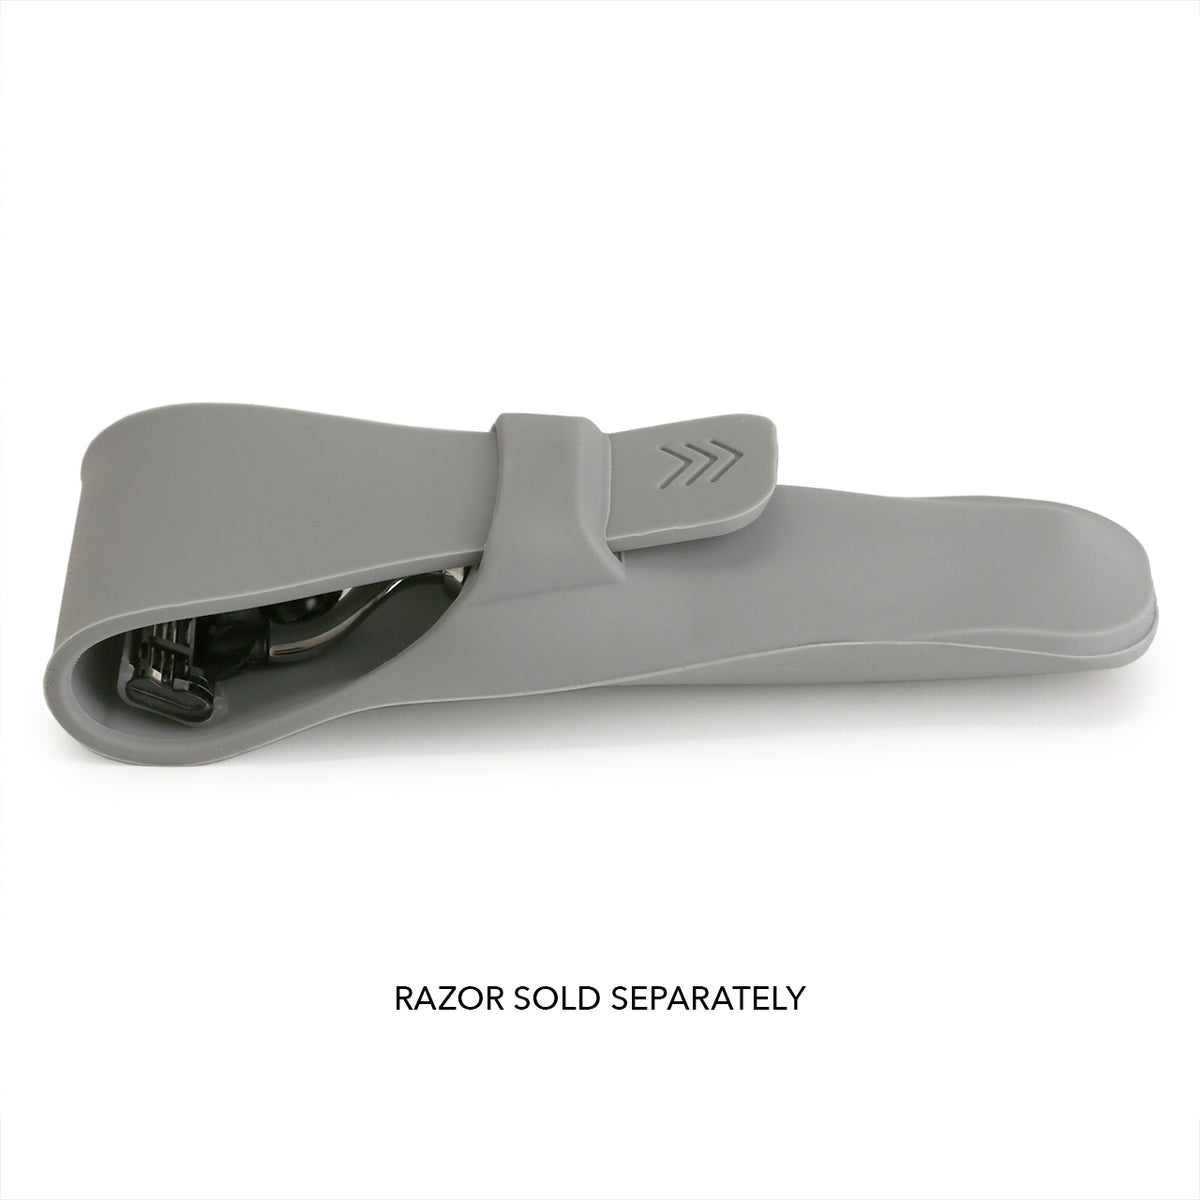 side view of razor case holding a mach3 razor (sold separately)